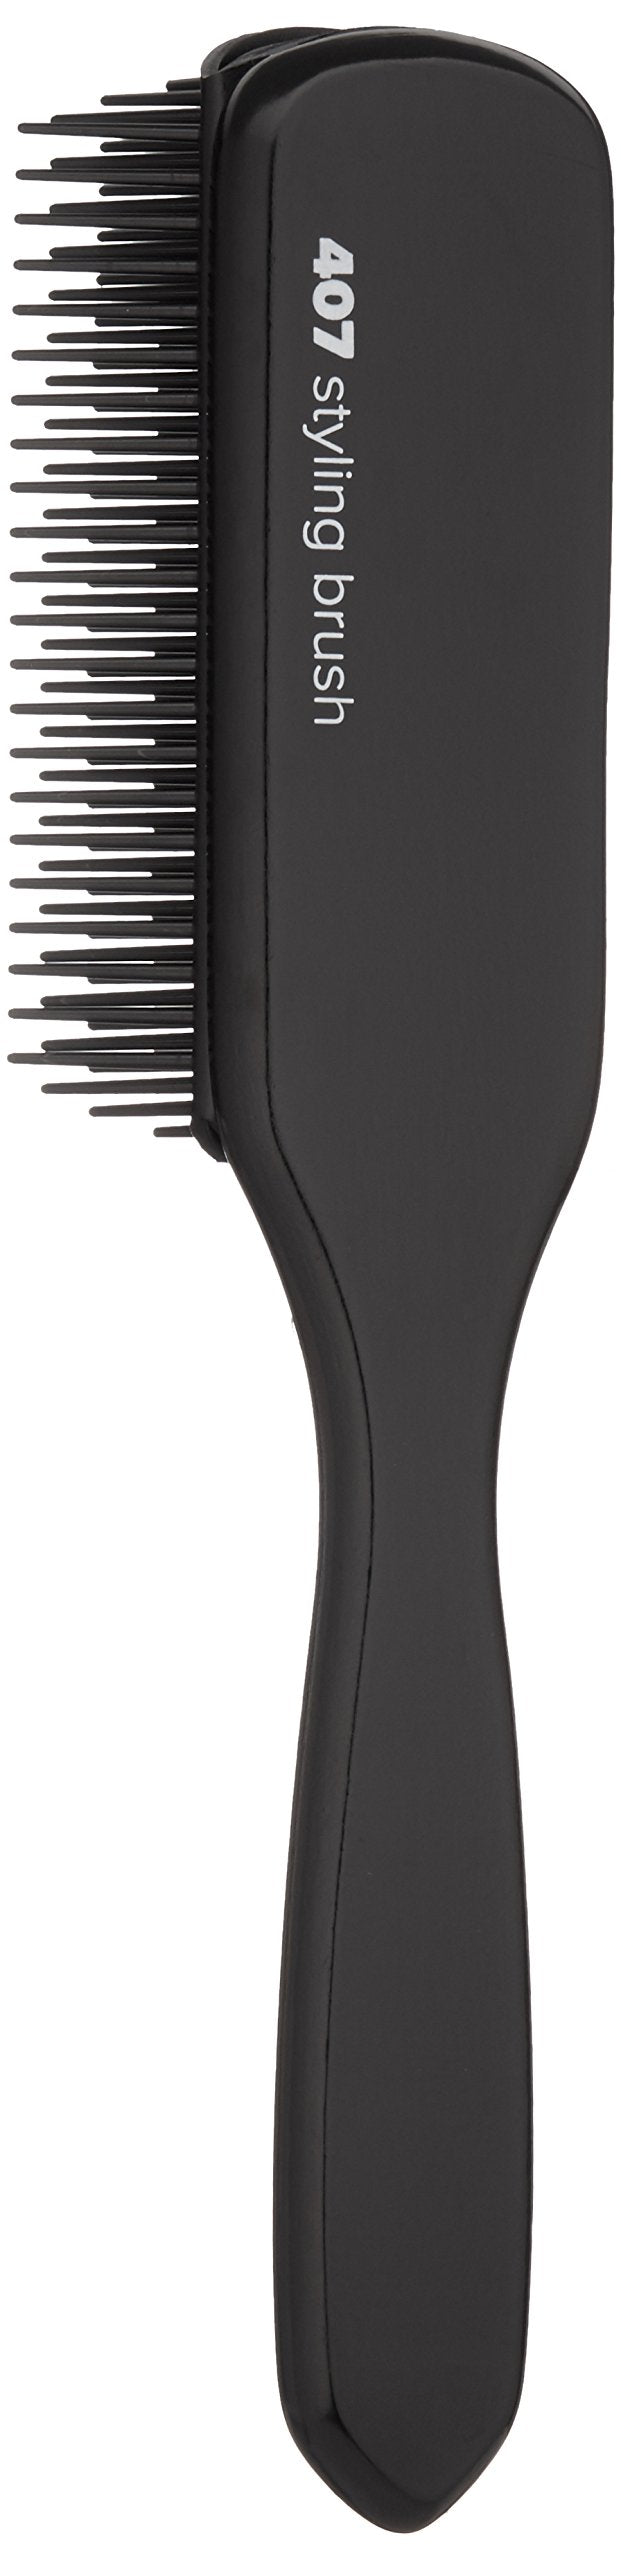 Paul Mitchell Pro Tools 407 Styling Brush, Nylon Bristle Brush Creates a Variety of Hairstyles, For All Hair Types